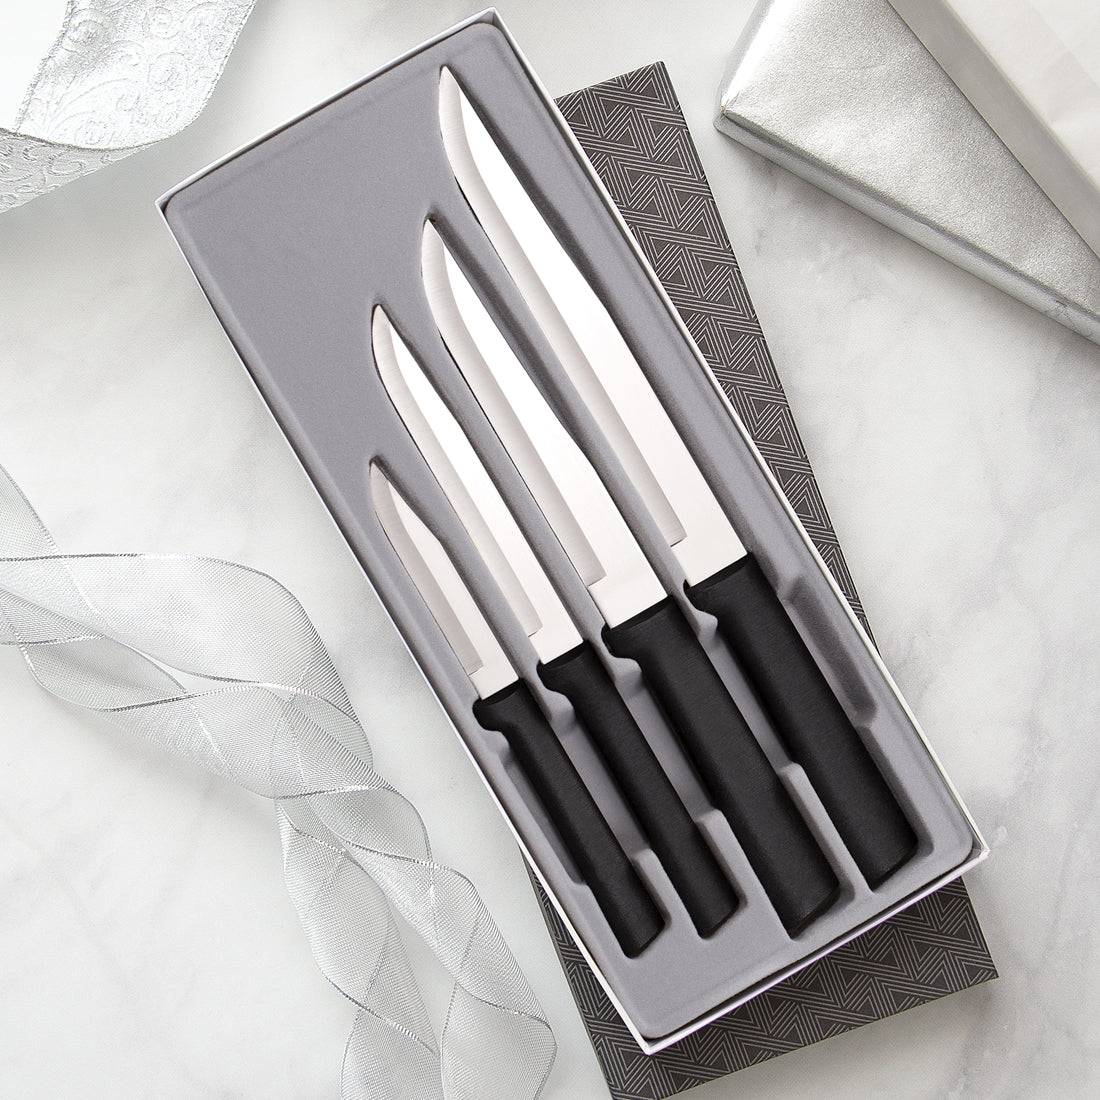 Rada Cutlery 2-Piece Paring Knife Set and Knife Sharpener – Stainless Steel  Blades With Aluminum Handles 